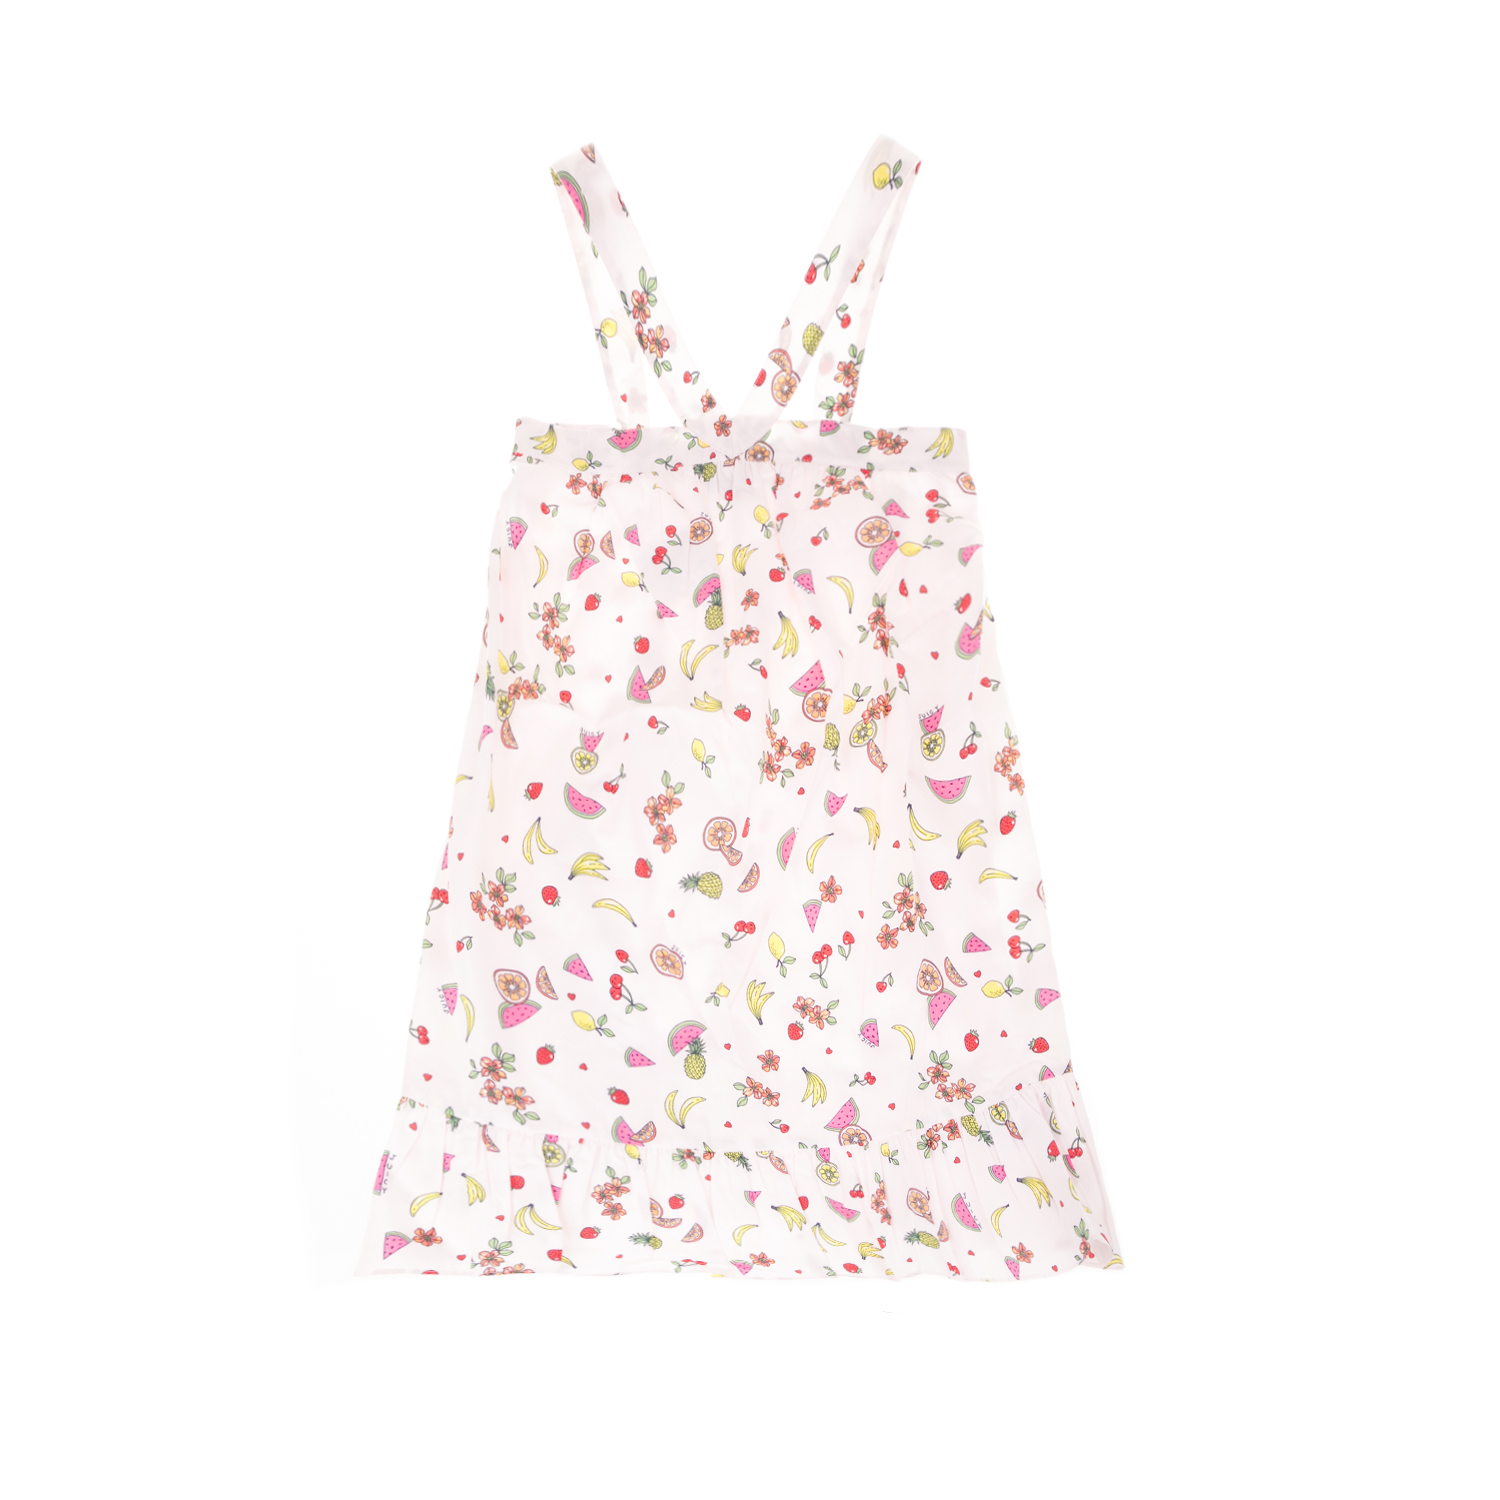 JUICY COUTURE KIDS Παιδικό φόρεμα JUICY COUTURE KIDS FRUIT SALAD λευκό εμπριμέ